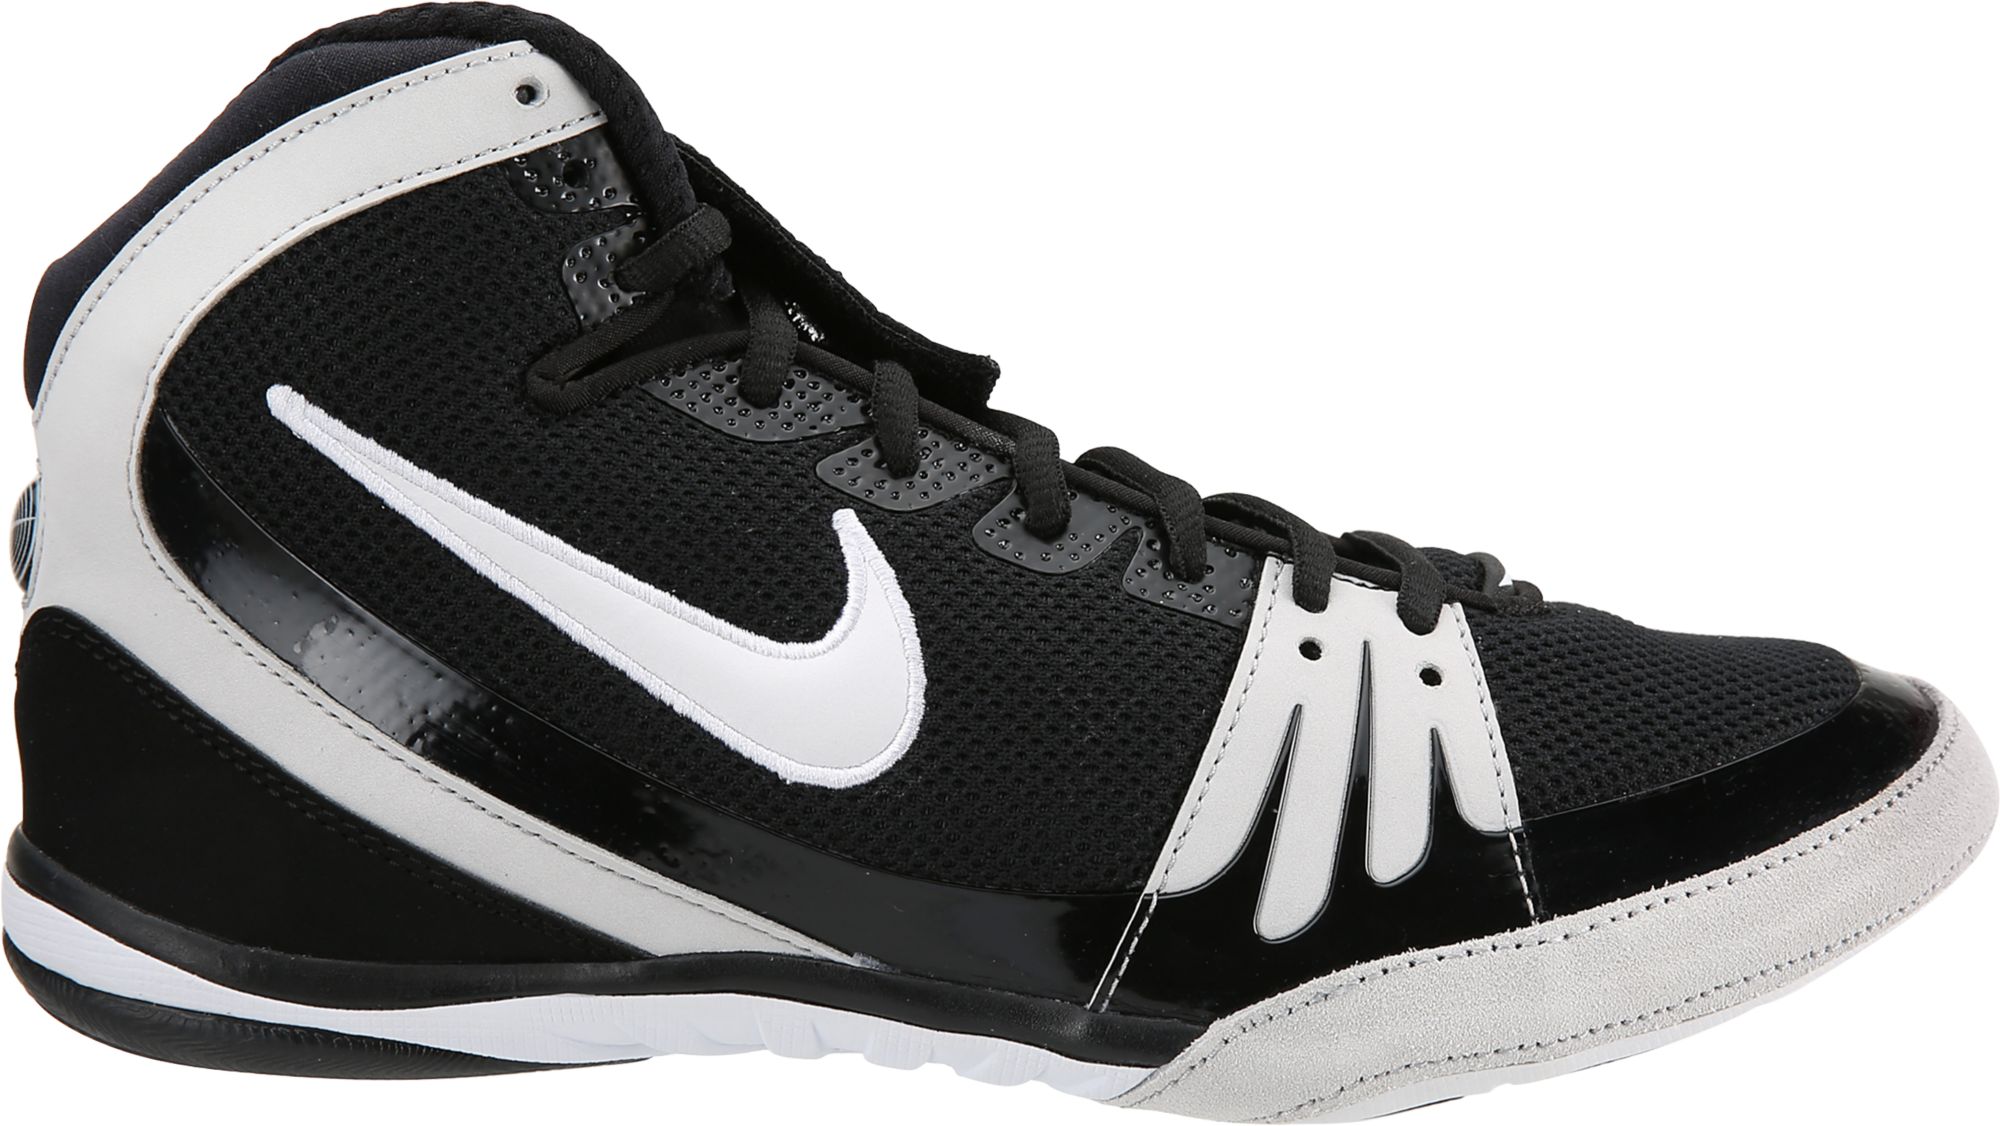 white and gold nike freeks wrestling shoes